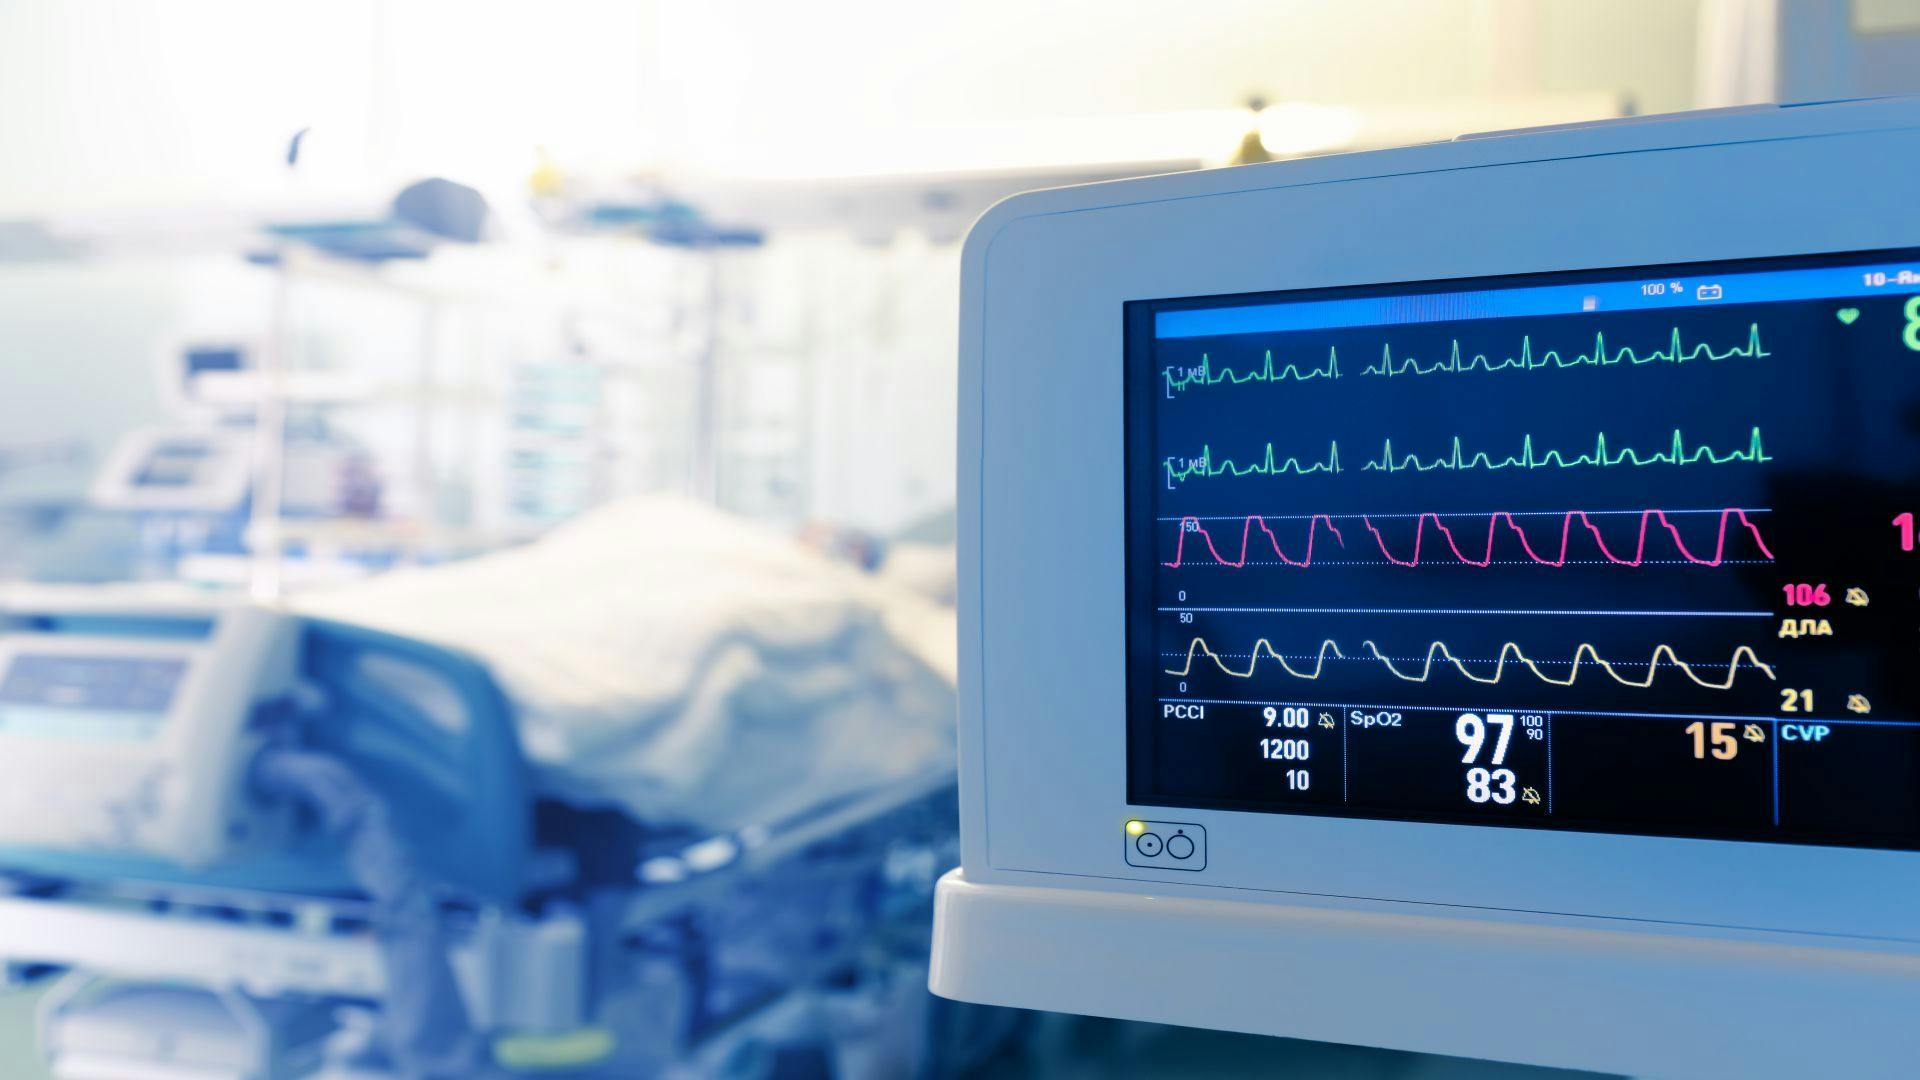 Test Can Identify ICU Patients at Risk of Life-Threatening Infections